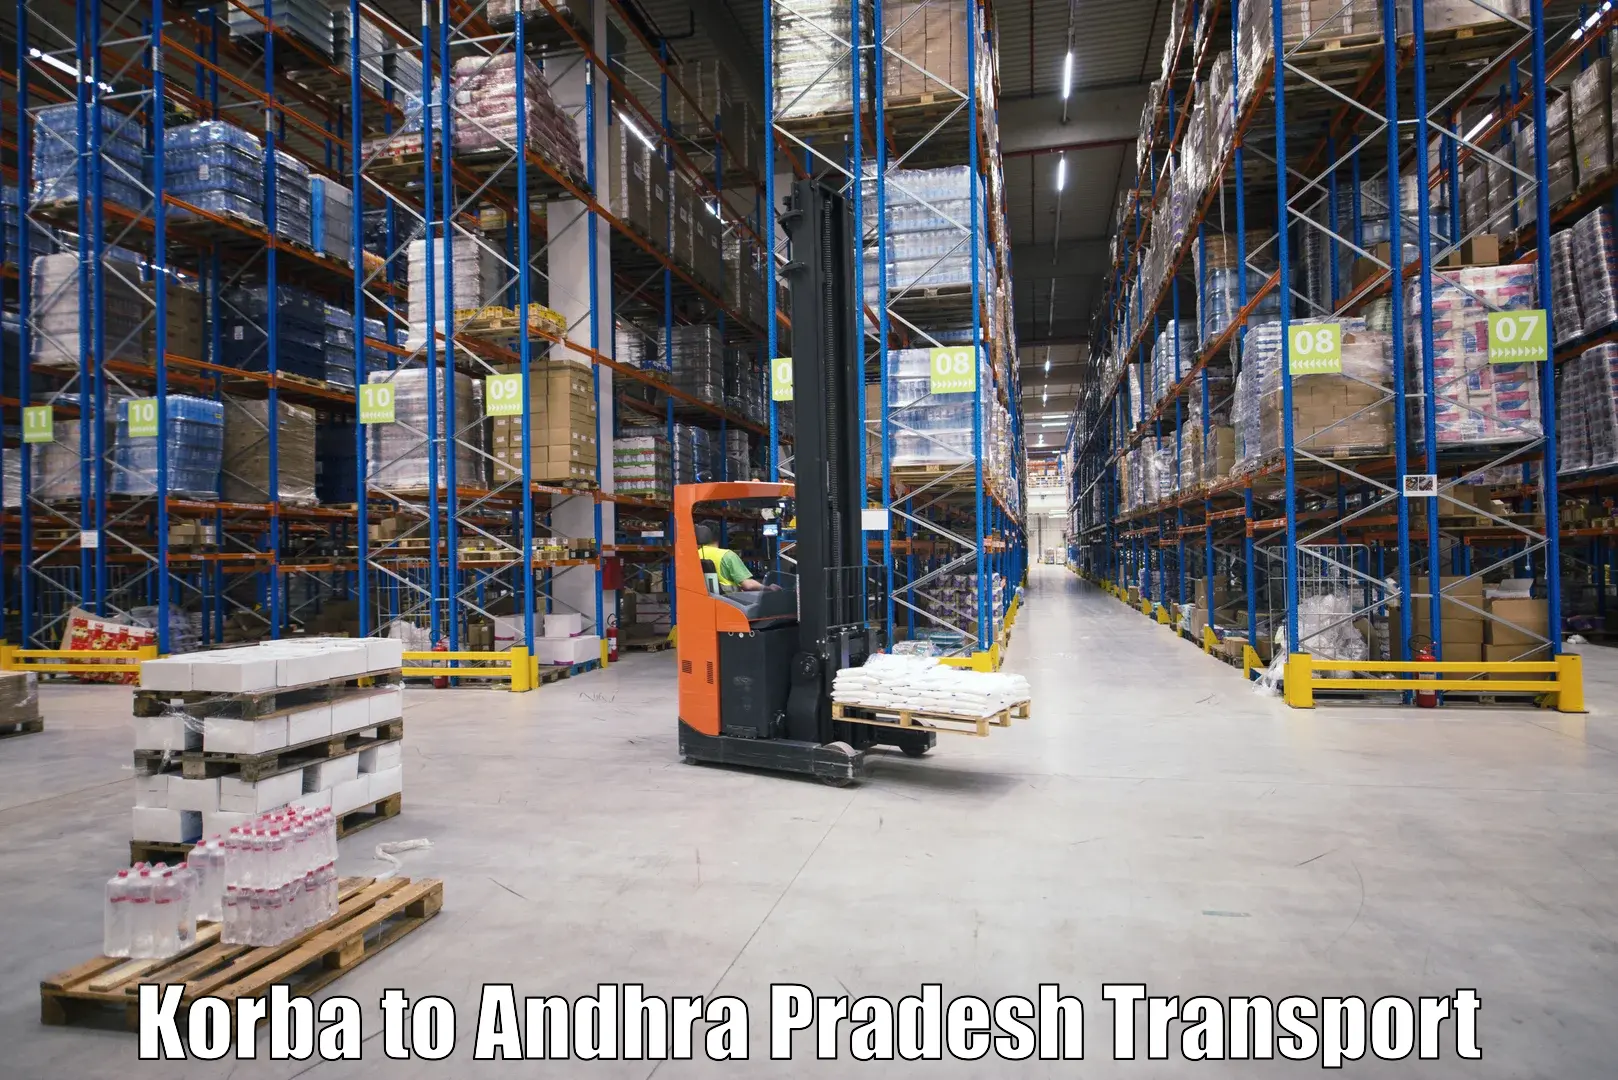 Goods delivery service Korba to Mangalagiri